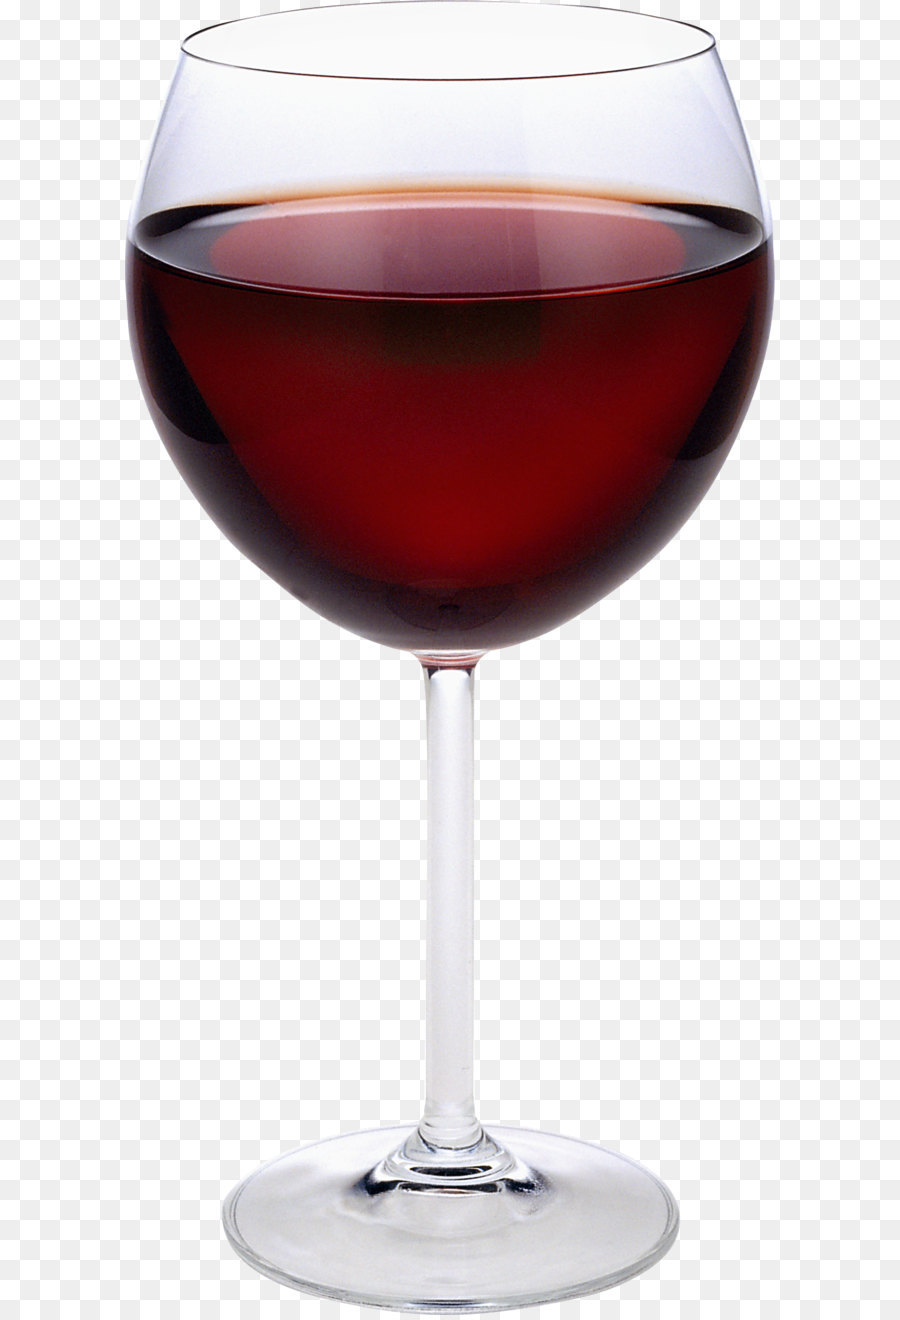 Red Wine Wine glass - Wine glass PNG image png download - 1069*2163 - Free Transparent Red Wine png Download.